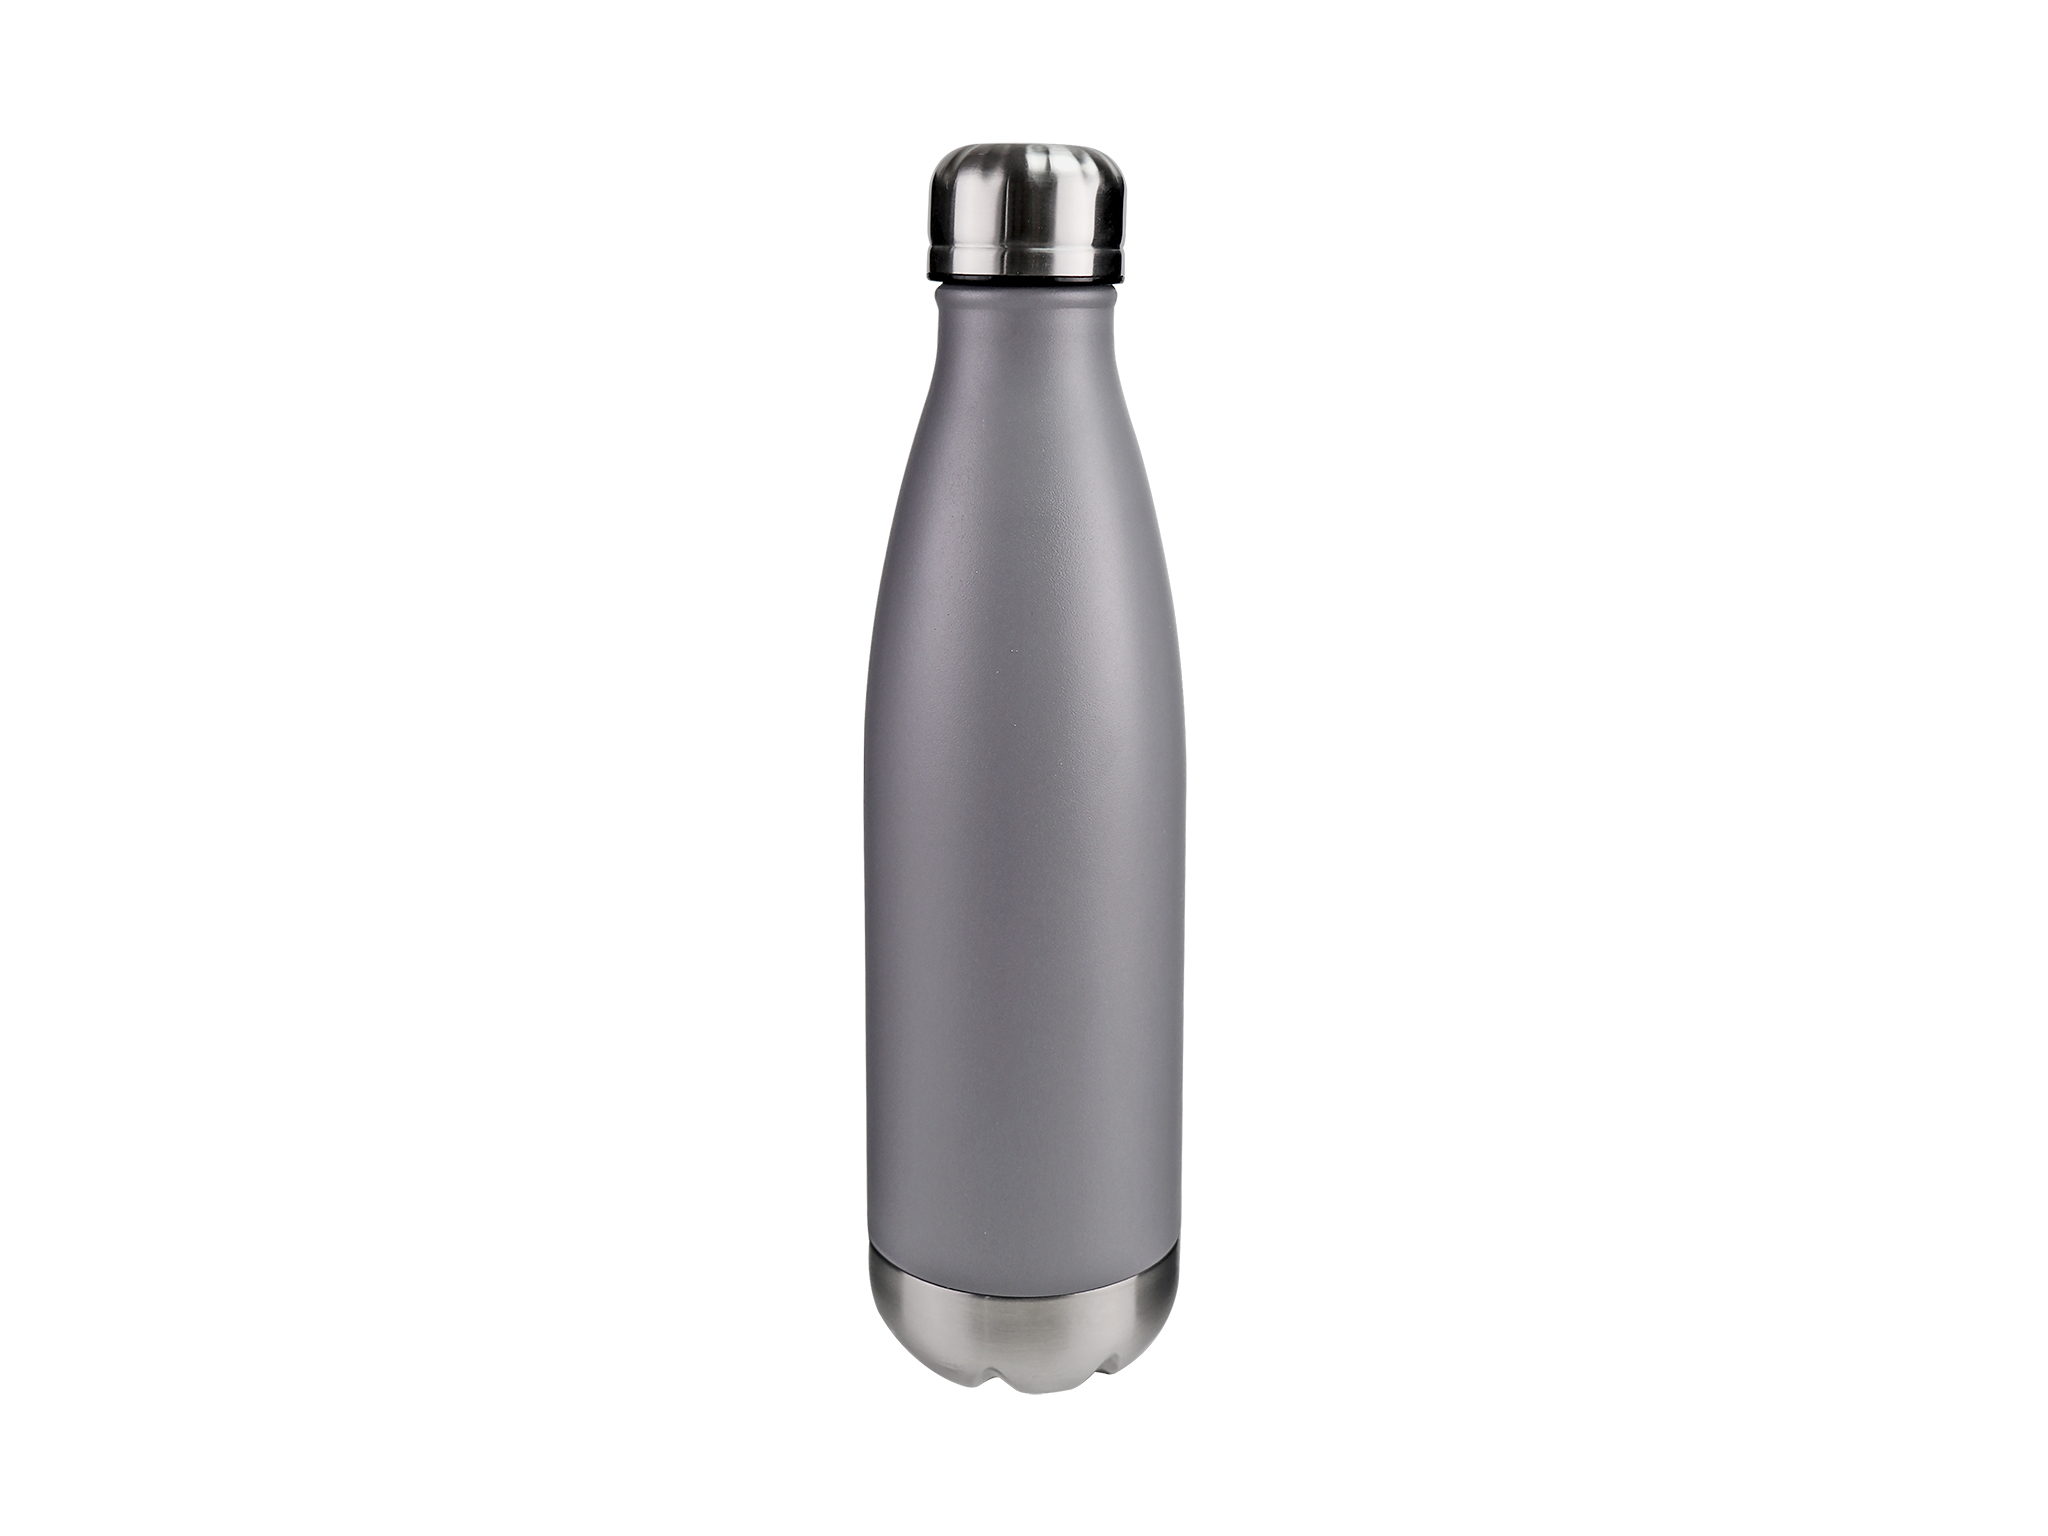 TANGO050X-074 - Bouteille isotherme inox incassable gris clair 0.50 L - Isobel